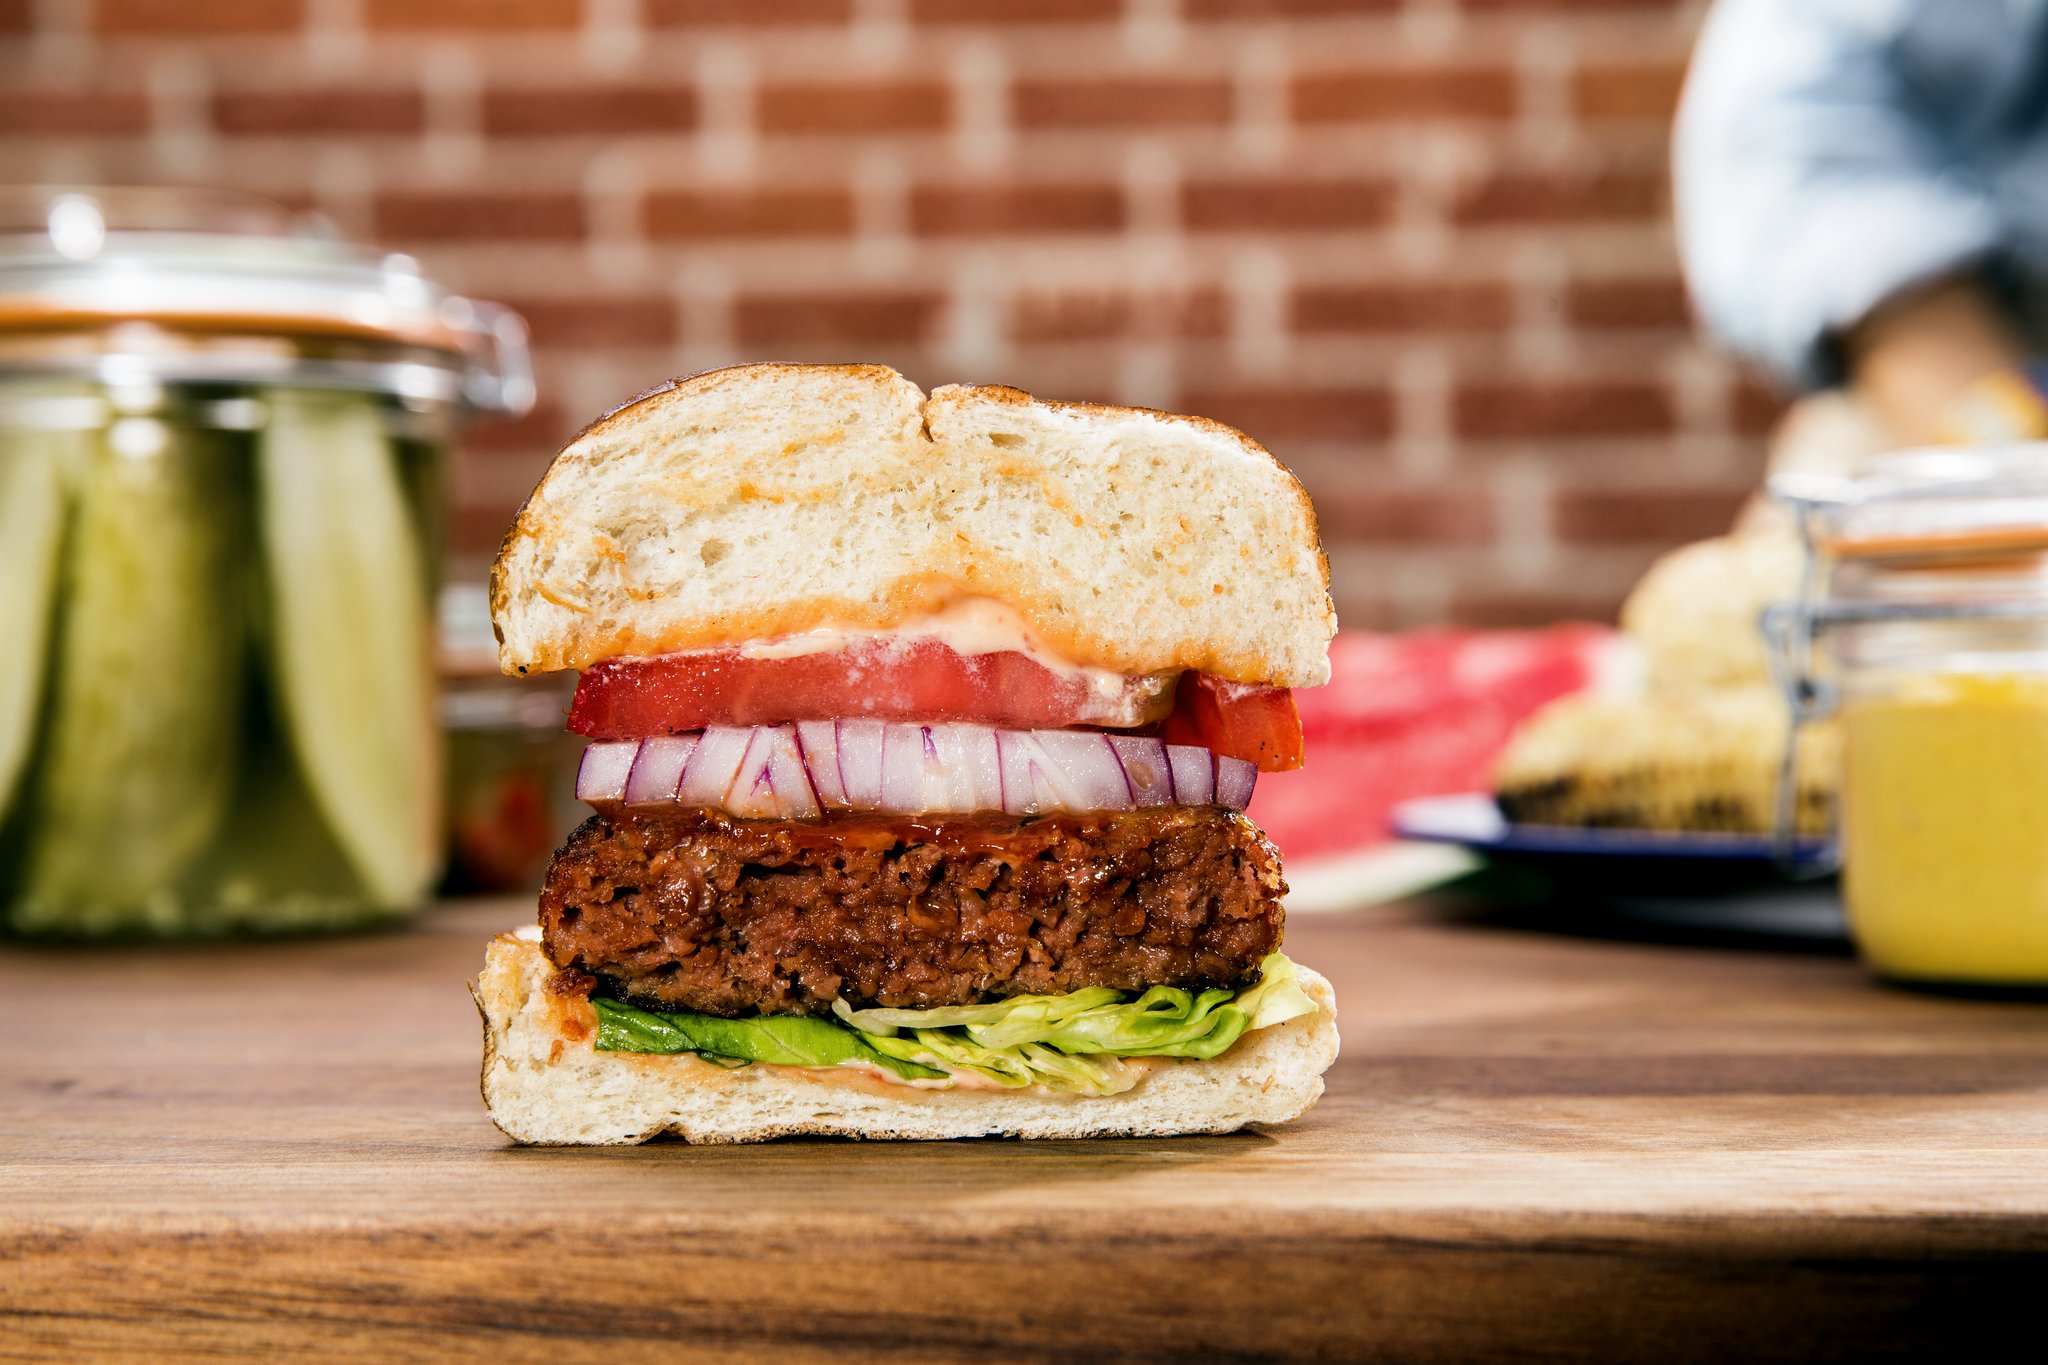 Grocery and Food Industry Market Research: Cattlemen Have Beef With Plant-Based Burgers